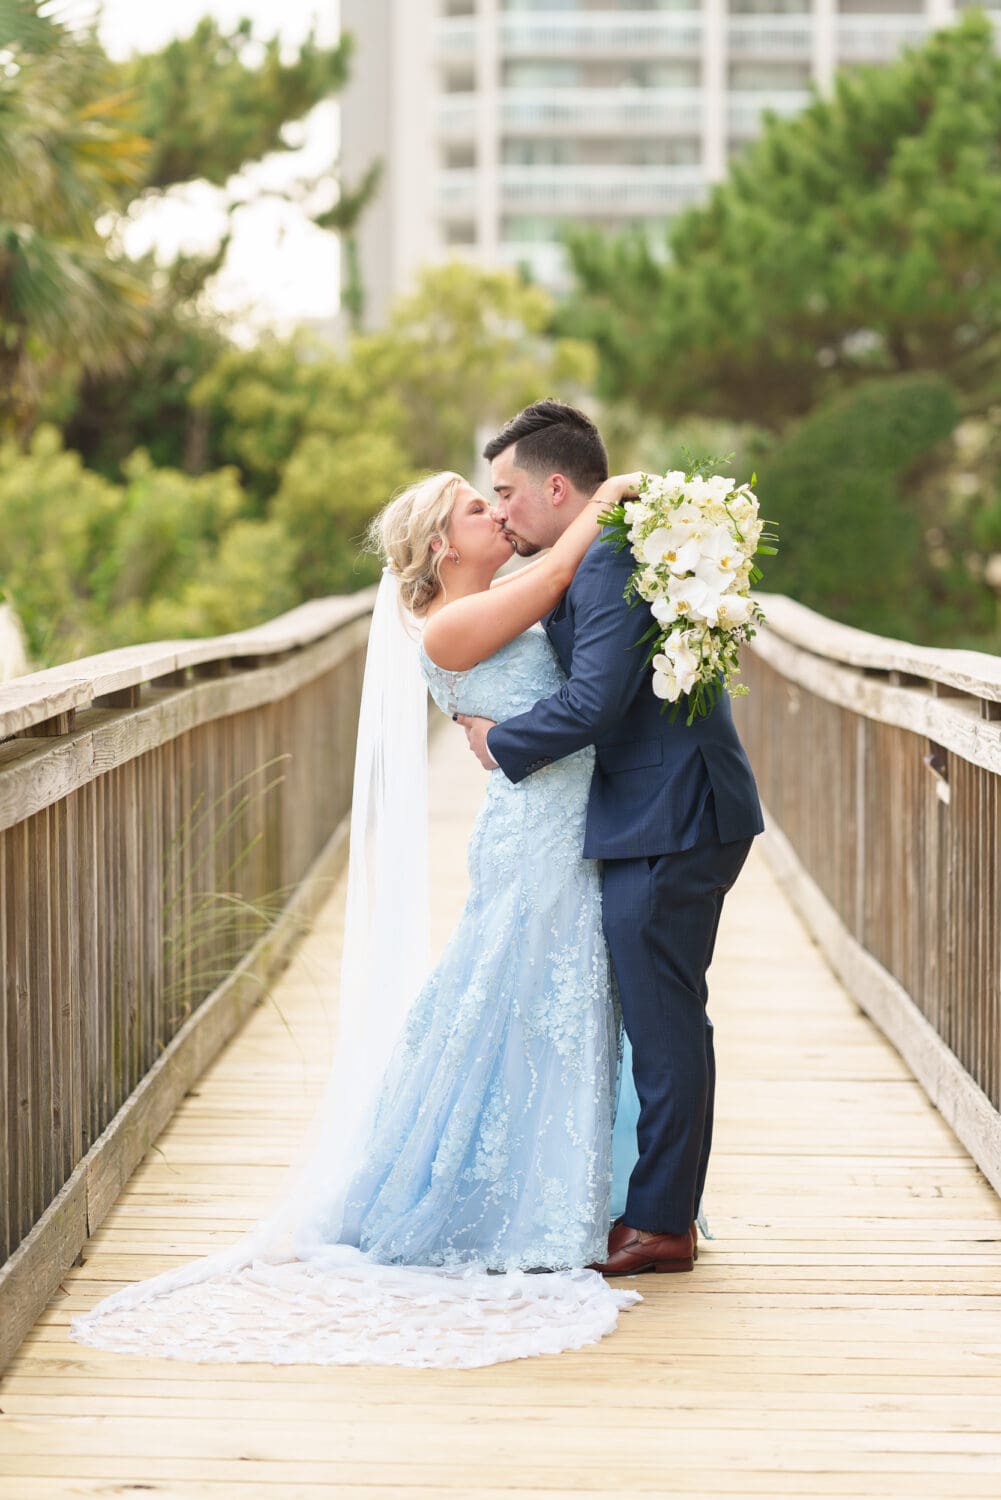 Romantic portraits with the bride and groom on a boardwalk after the first look - Hilton Myrtle Beach Resort